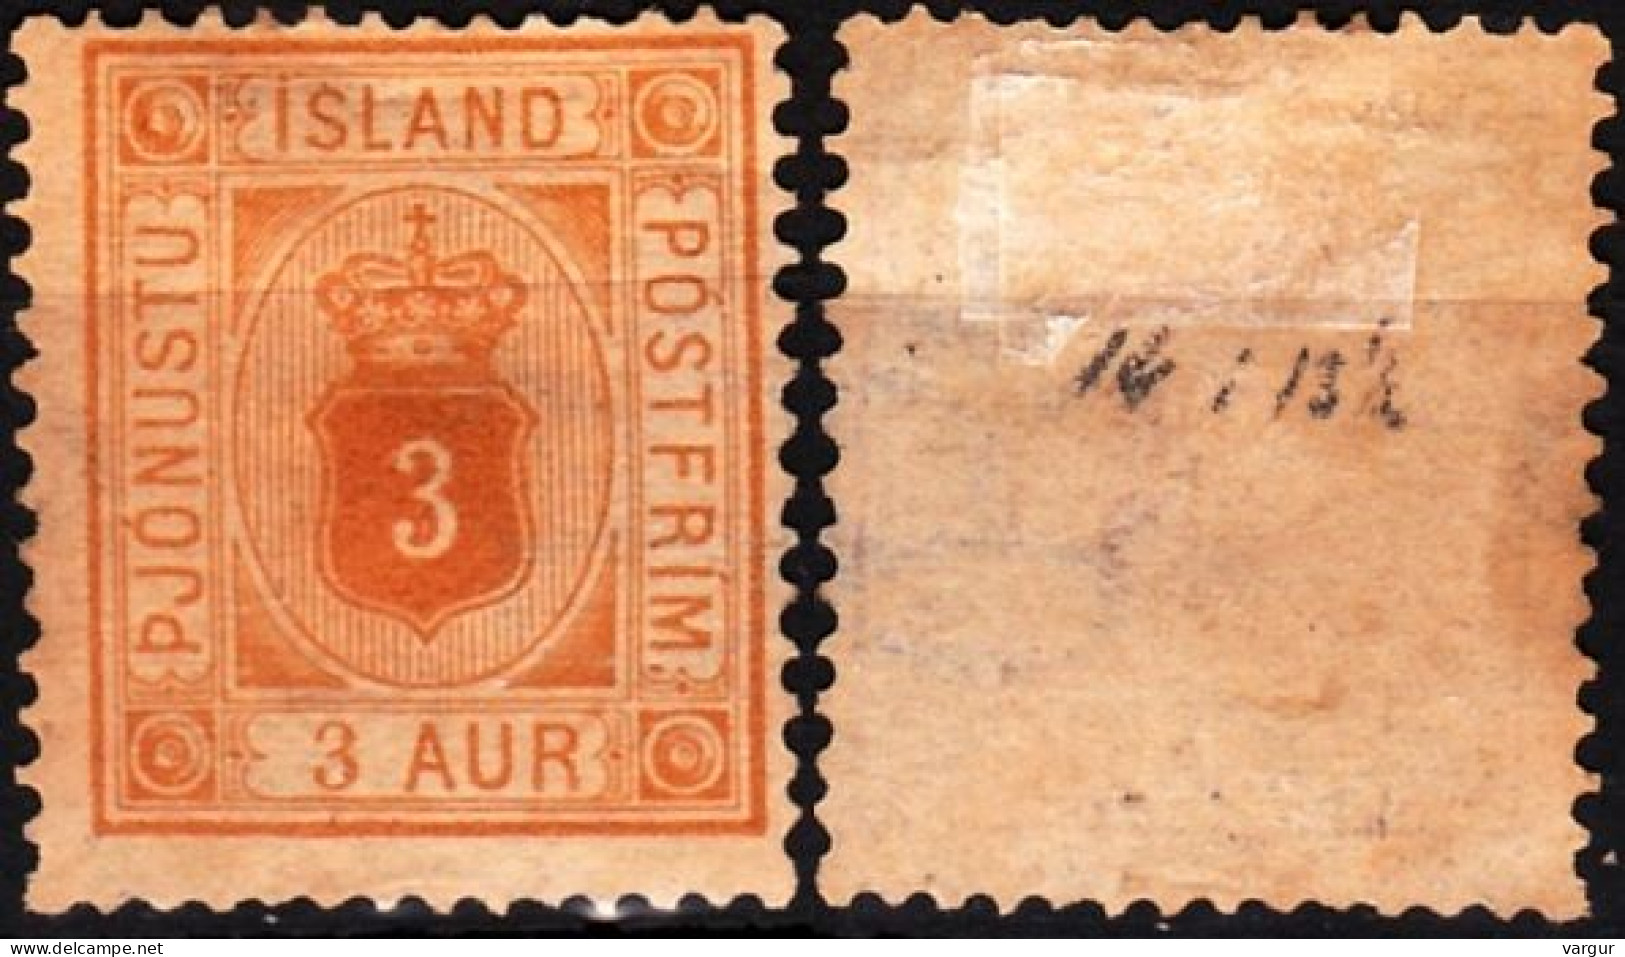 ICELAND / ISLAND Postage Due 1876 Figure In Oval. 3A, Perf 14:13 1/2, MH No Gum #1 - Servizio